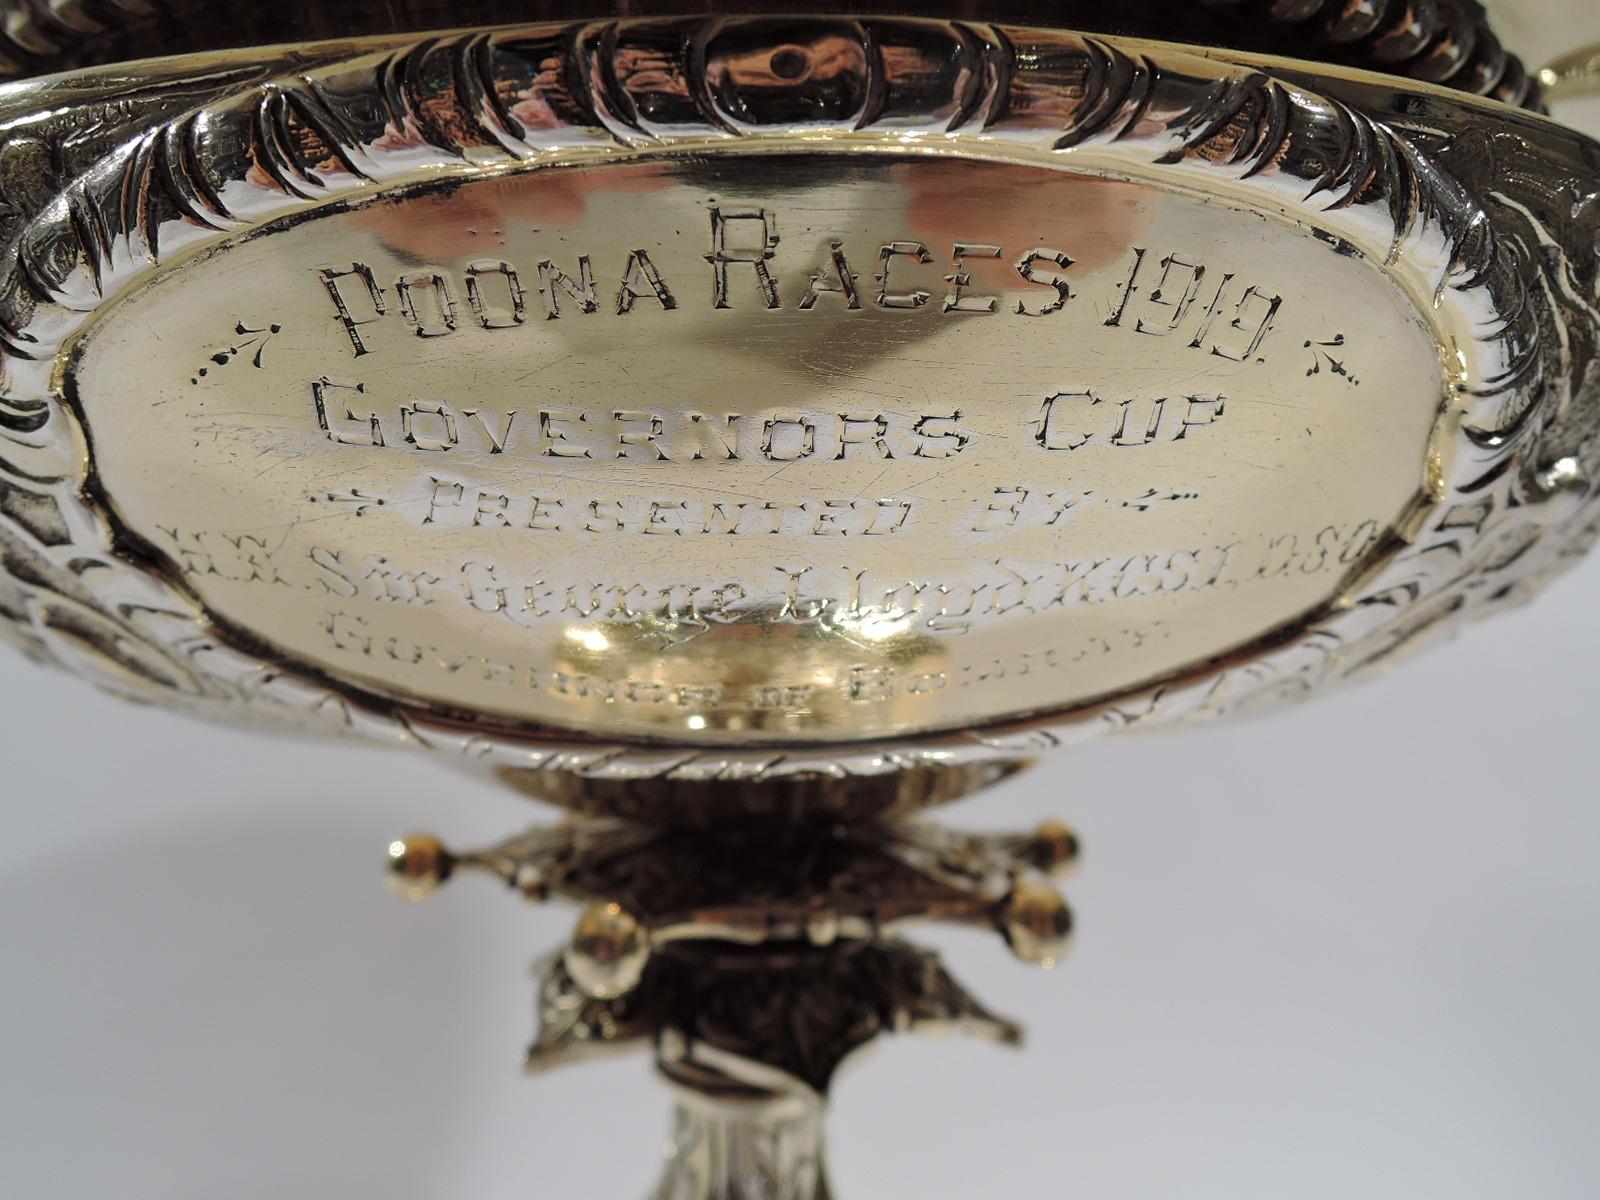 Souvenir of Raj India: Governor's Cup Poona Race Trophy, 1919 3